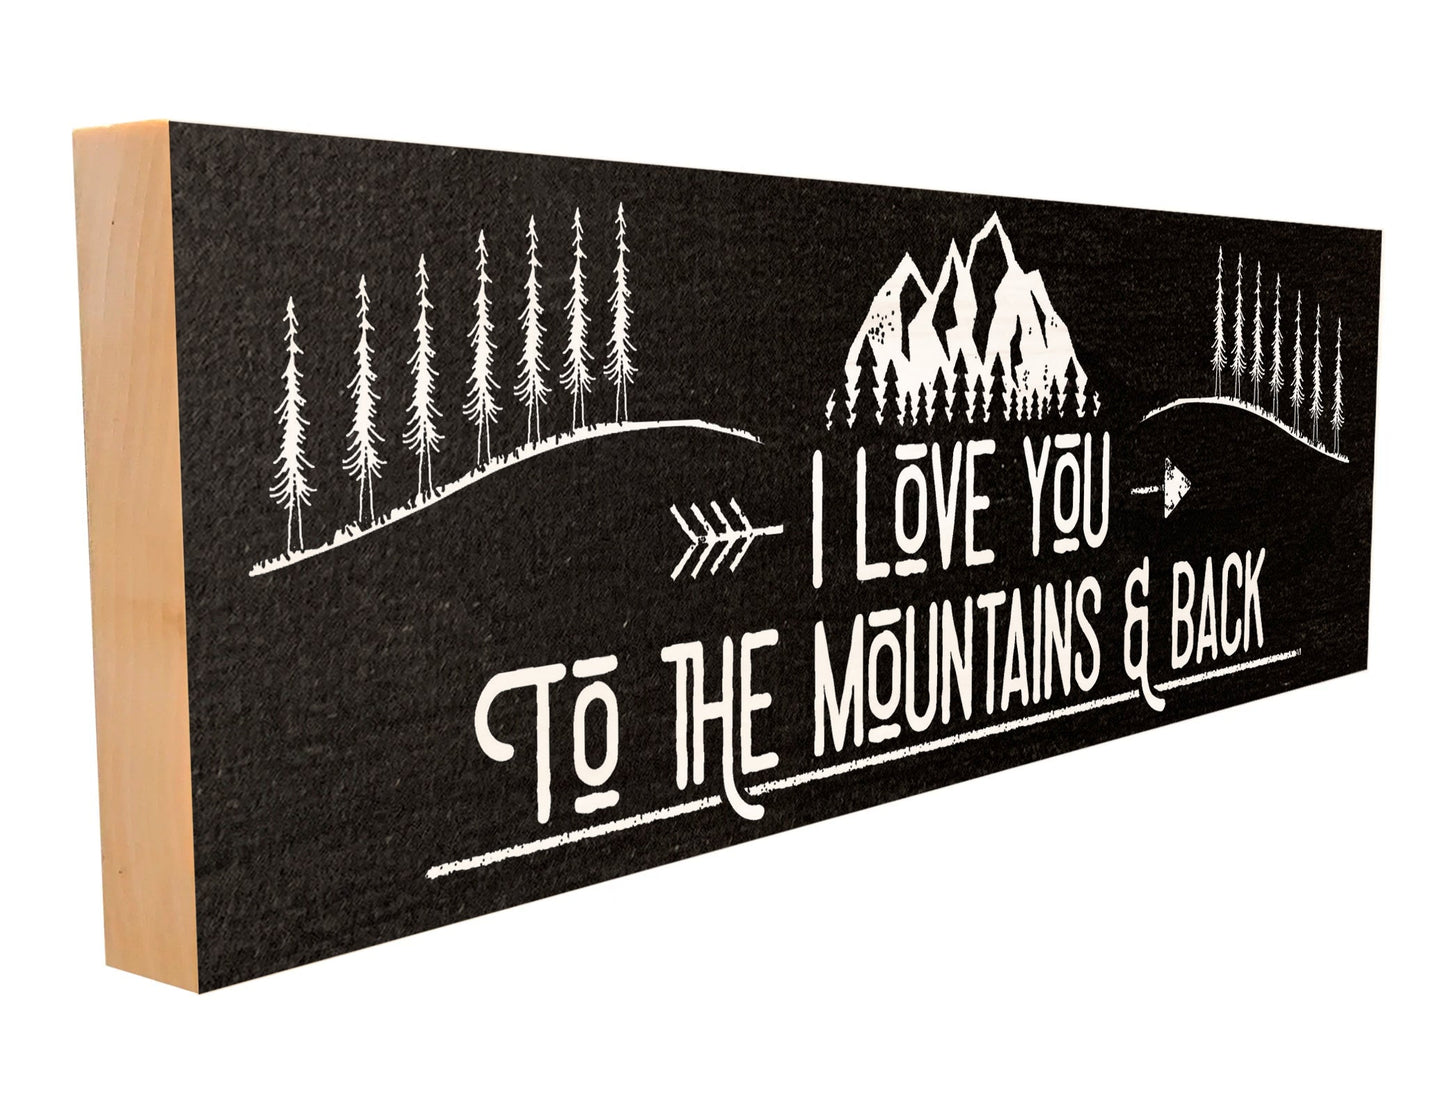 I Love You to The Mountains and Back.